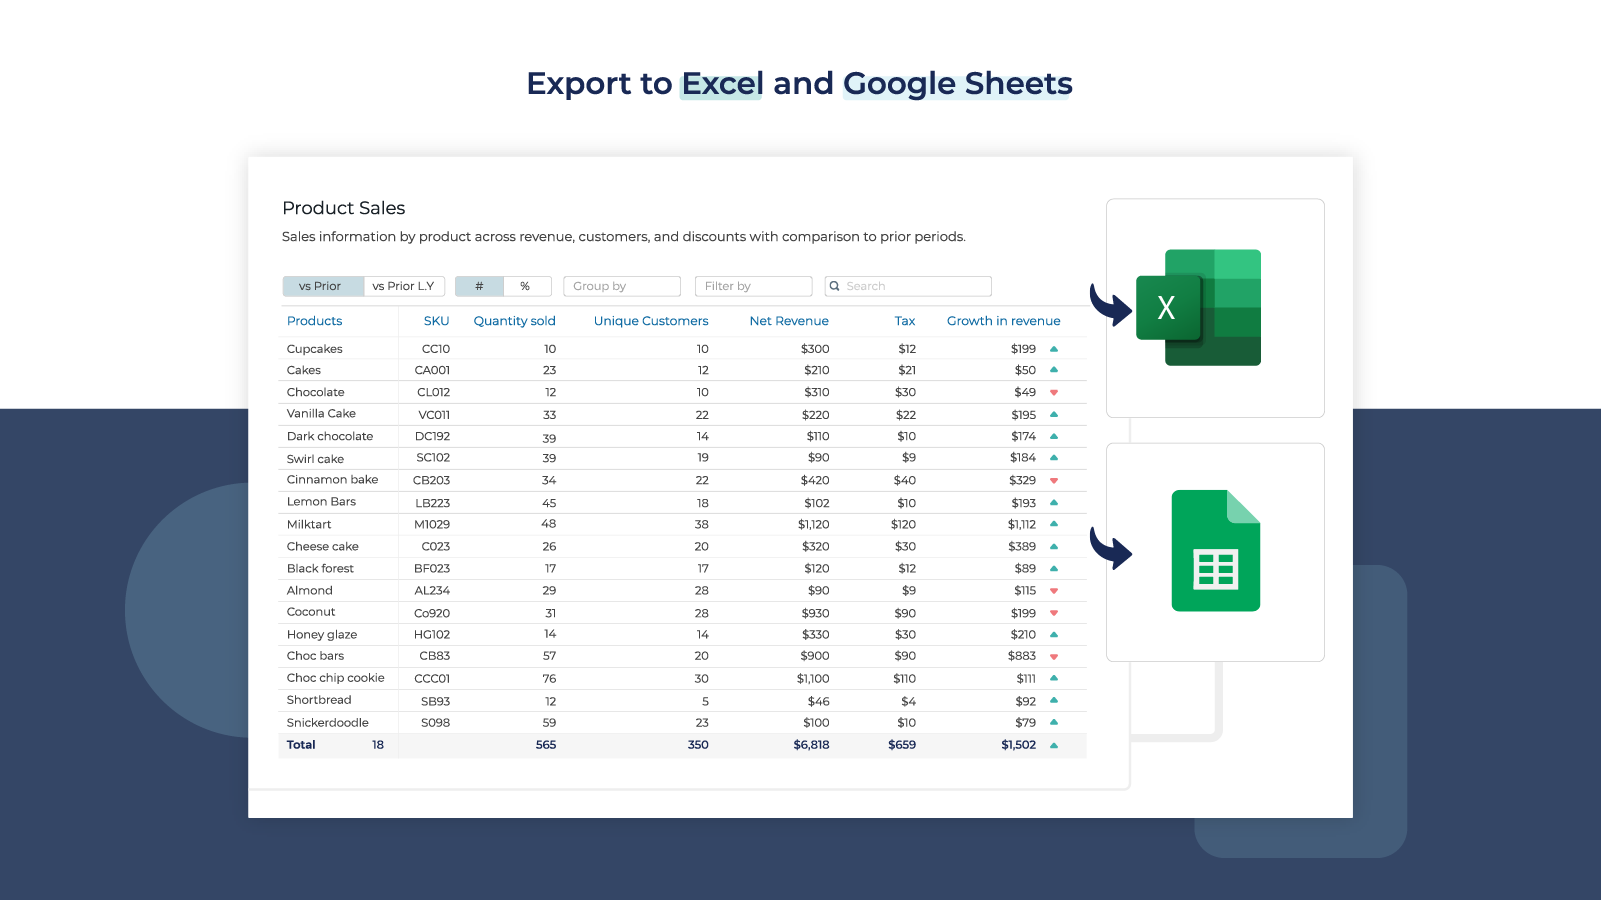 Export to Excel and Google Sheets: Export anywhere - export any graph or report to PDF, Excel, Google Sheets or reimagine reporting with live view.